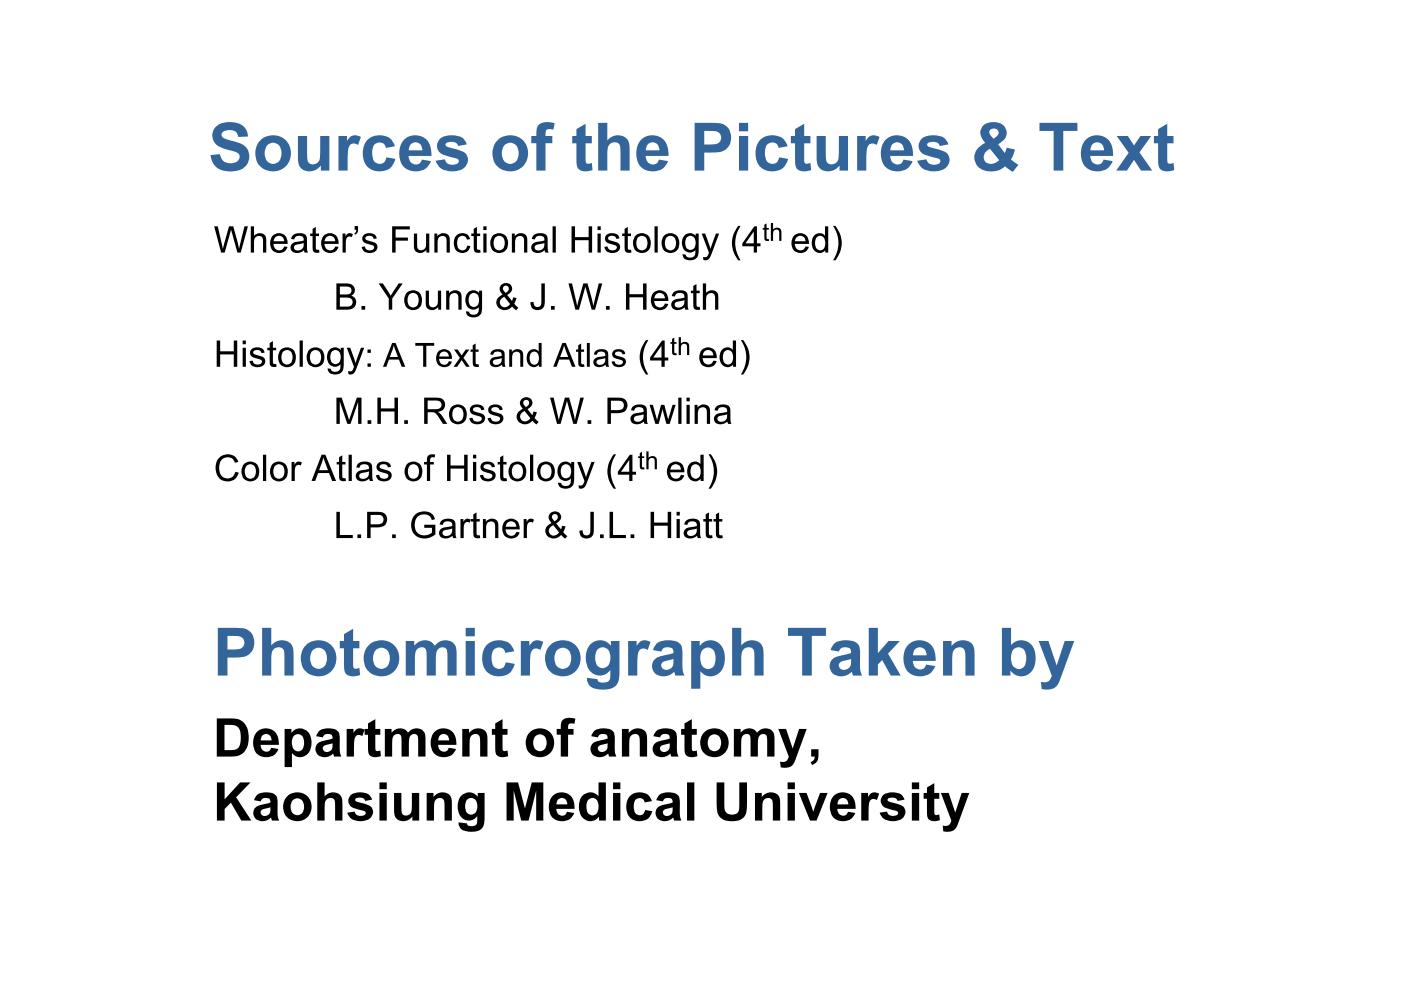 block6-2_02.jpg - Sources of the Pictures & TextWheater's Functional Histology (4th ed)        B. Young & J. W. HeathHistology: A Text and Atlas (4th ed)        M.H. Ross & W. PawlinaColor Atlas of Histology (4th ed)        L.P. Gartner & J.L. HiattPhotomicrograph Taken byDepartment of anatomy,Kaohsiung Medical University